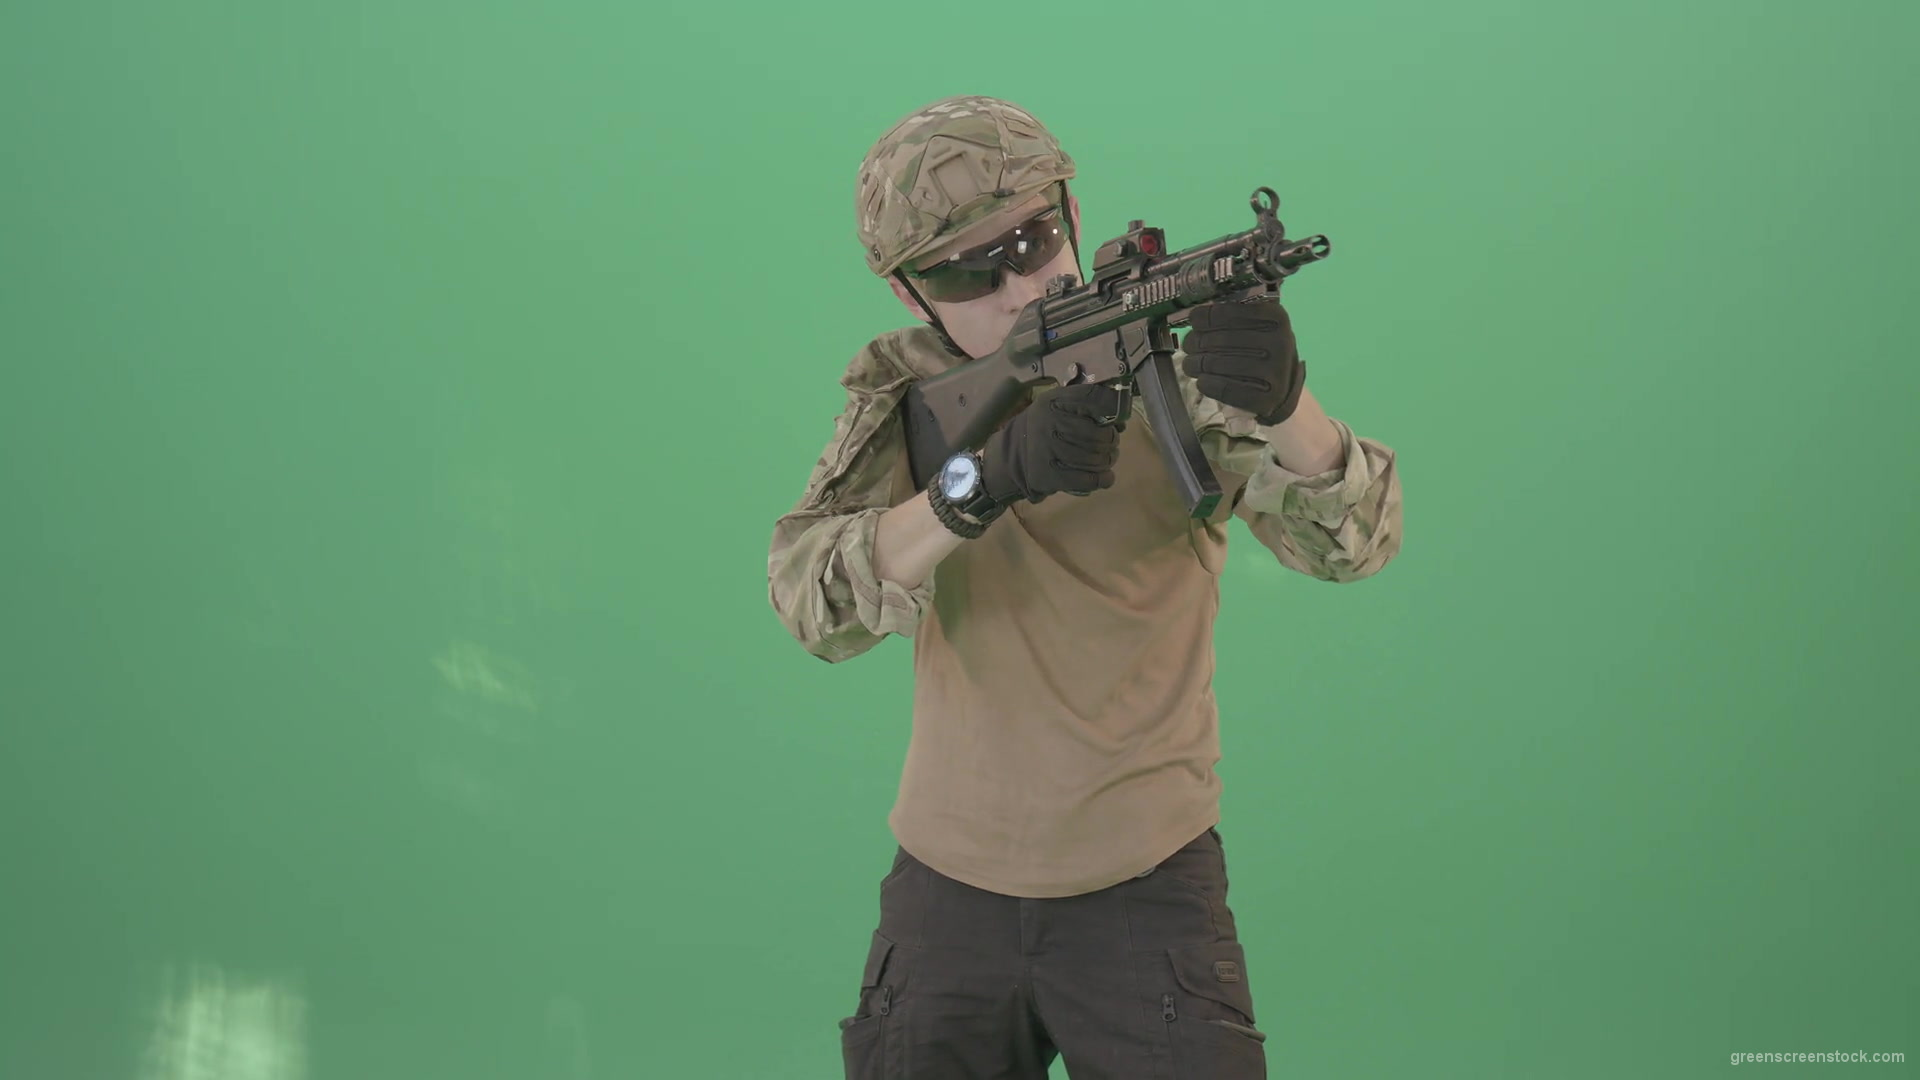 Soldier-in-army-uniform-shooting-with-gun-fire-machine-isolated-on-green-screen-4K-Video-Footage-1920_007 Green Screen Stock